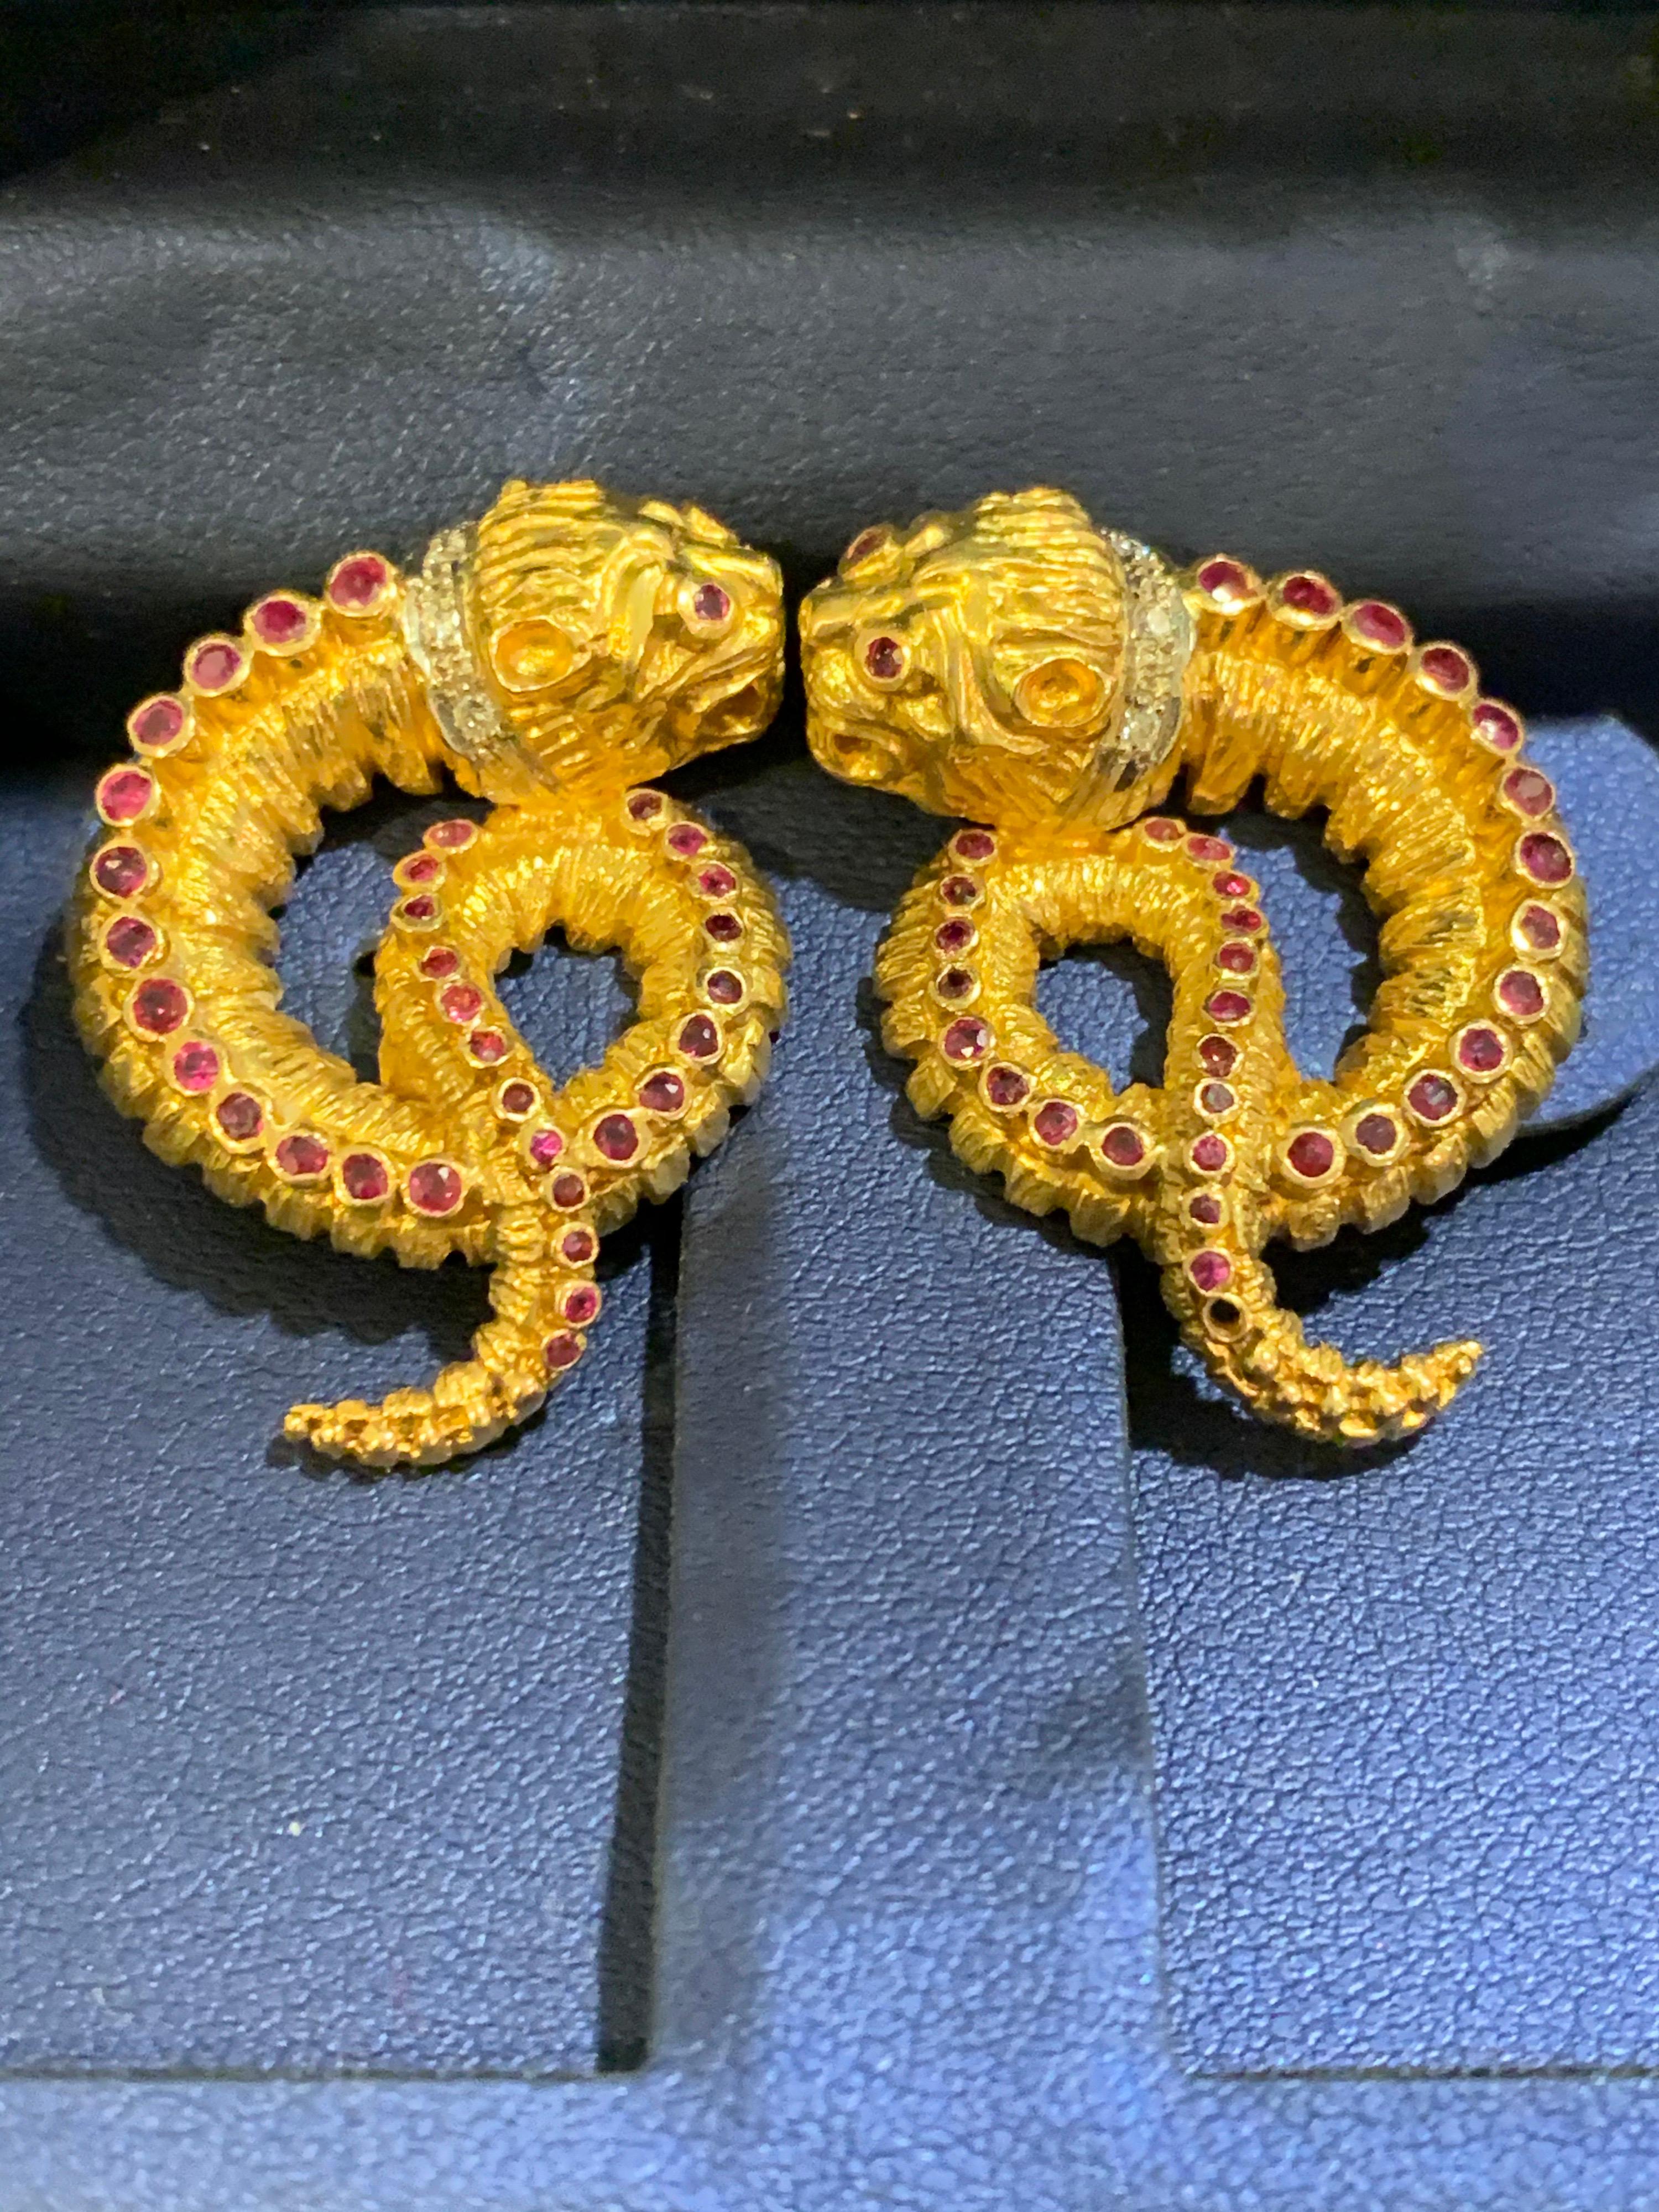 Earrings by Ilia’s Lalaounis Chimera 17.3dwt 18-Karat, Rubies and Diamonds For Sale 1